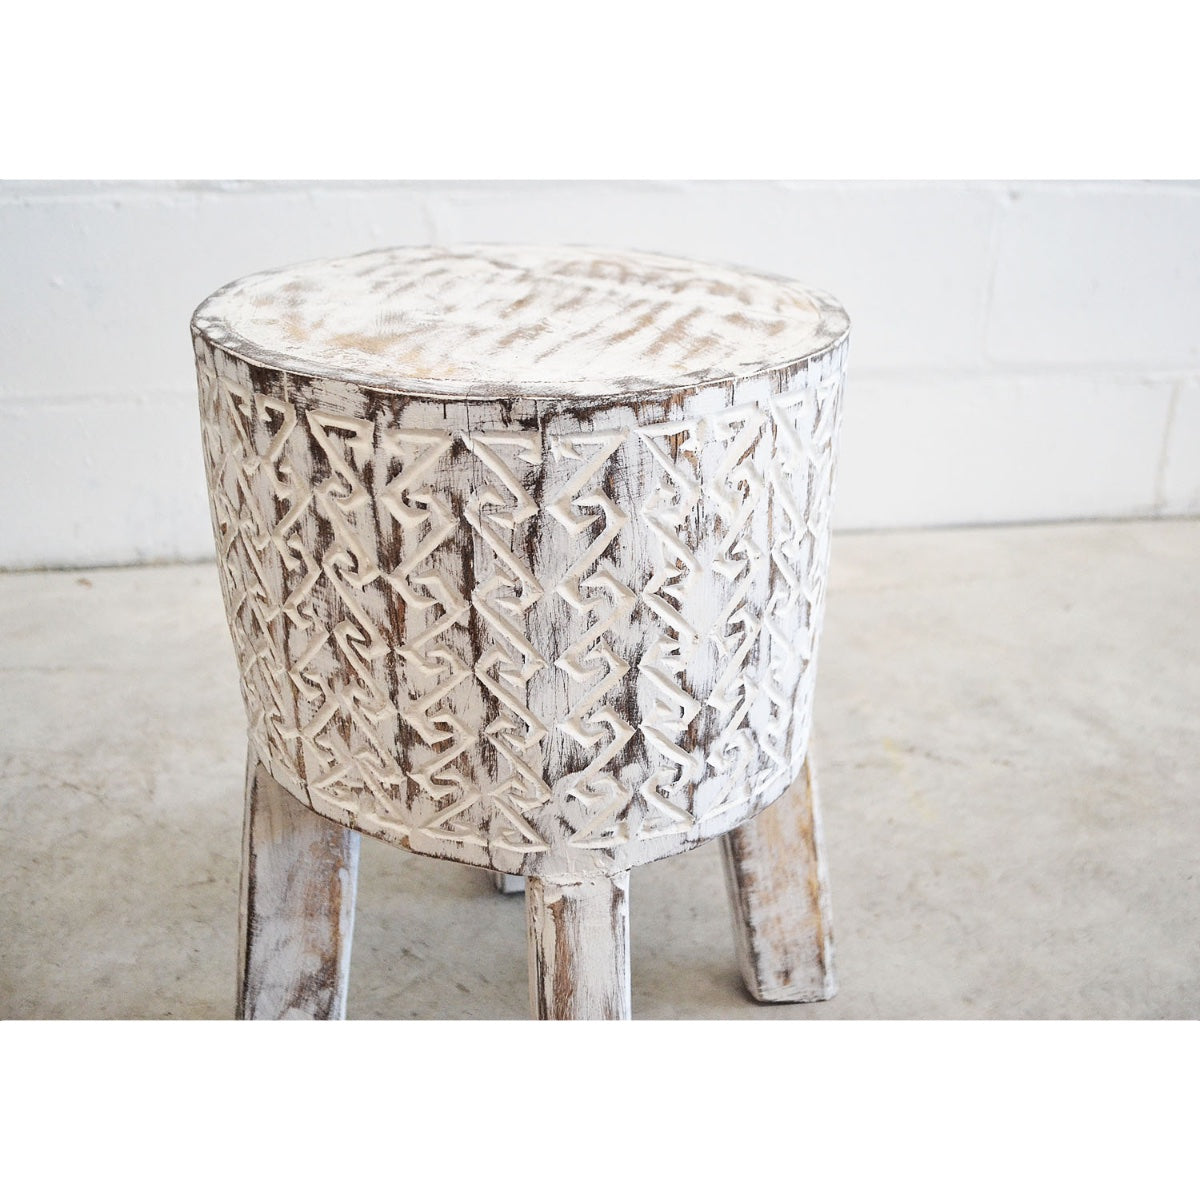 PREORDER - Tribal Carved Palm Stool With Legs - White Wash